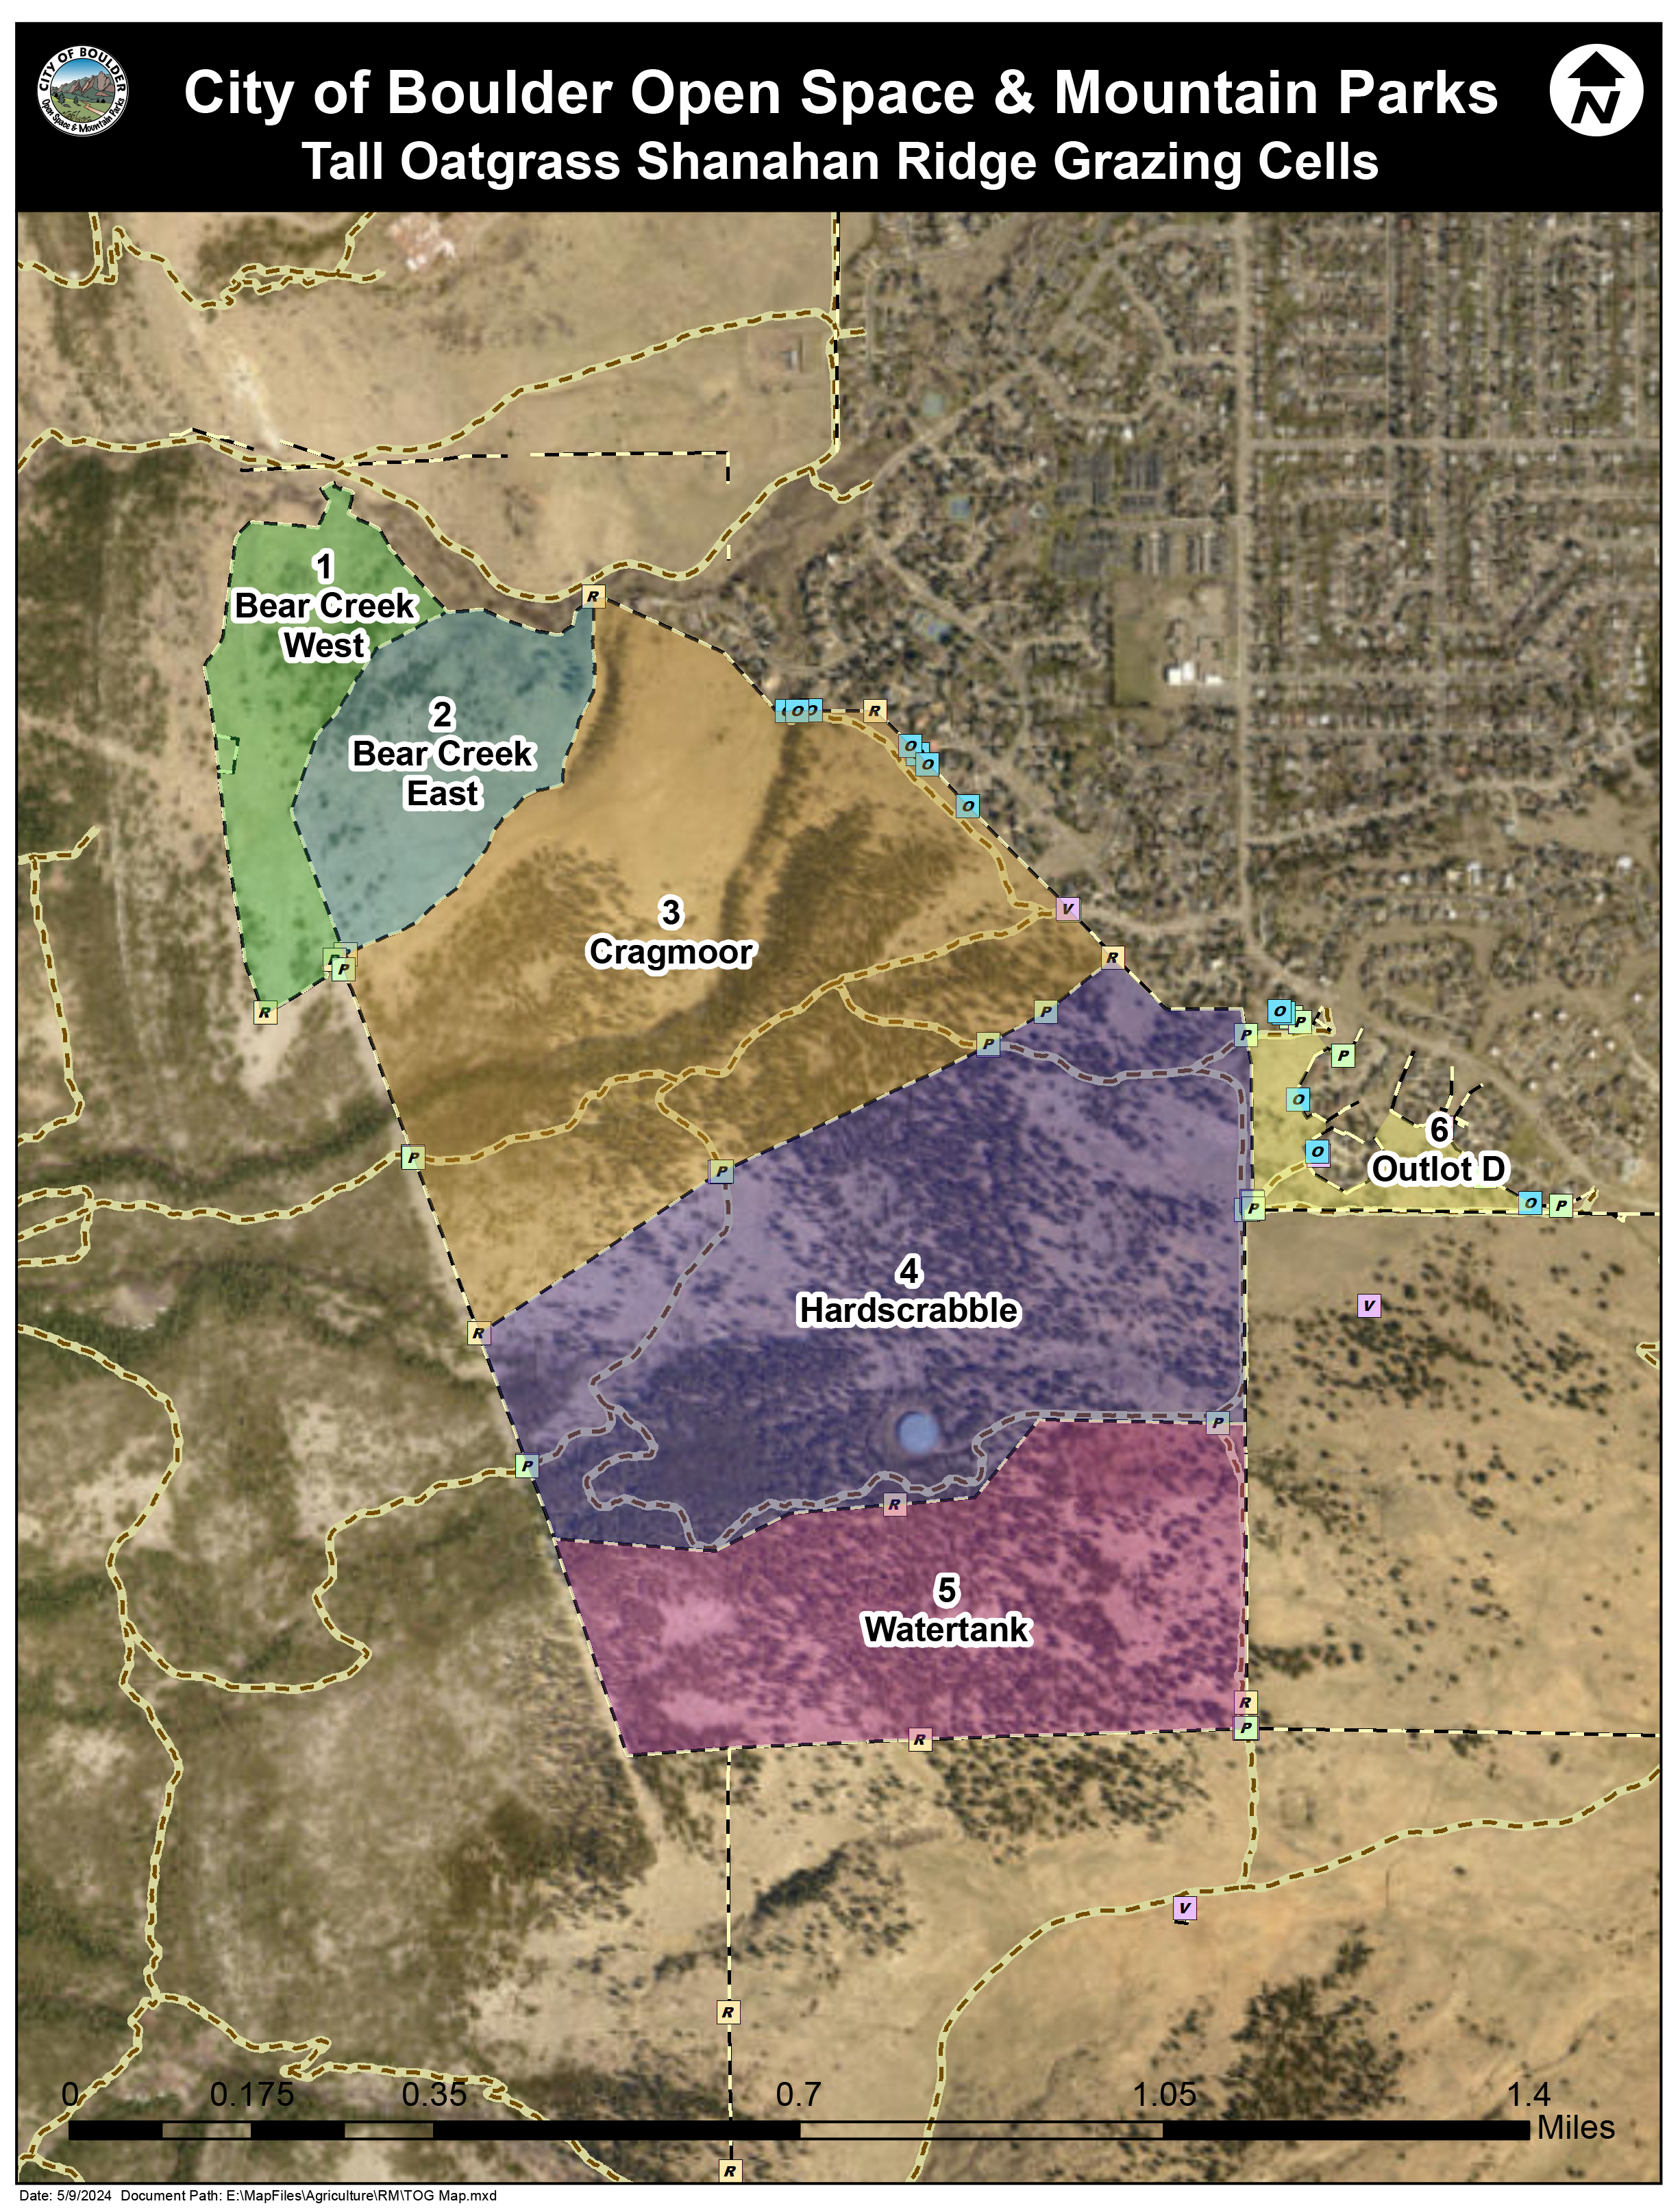 Map showing where cattle grazing will occur on Shanahan Ridge south of Boulder